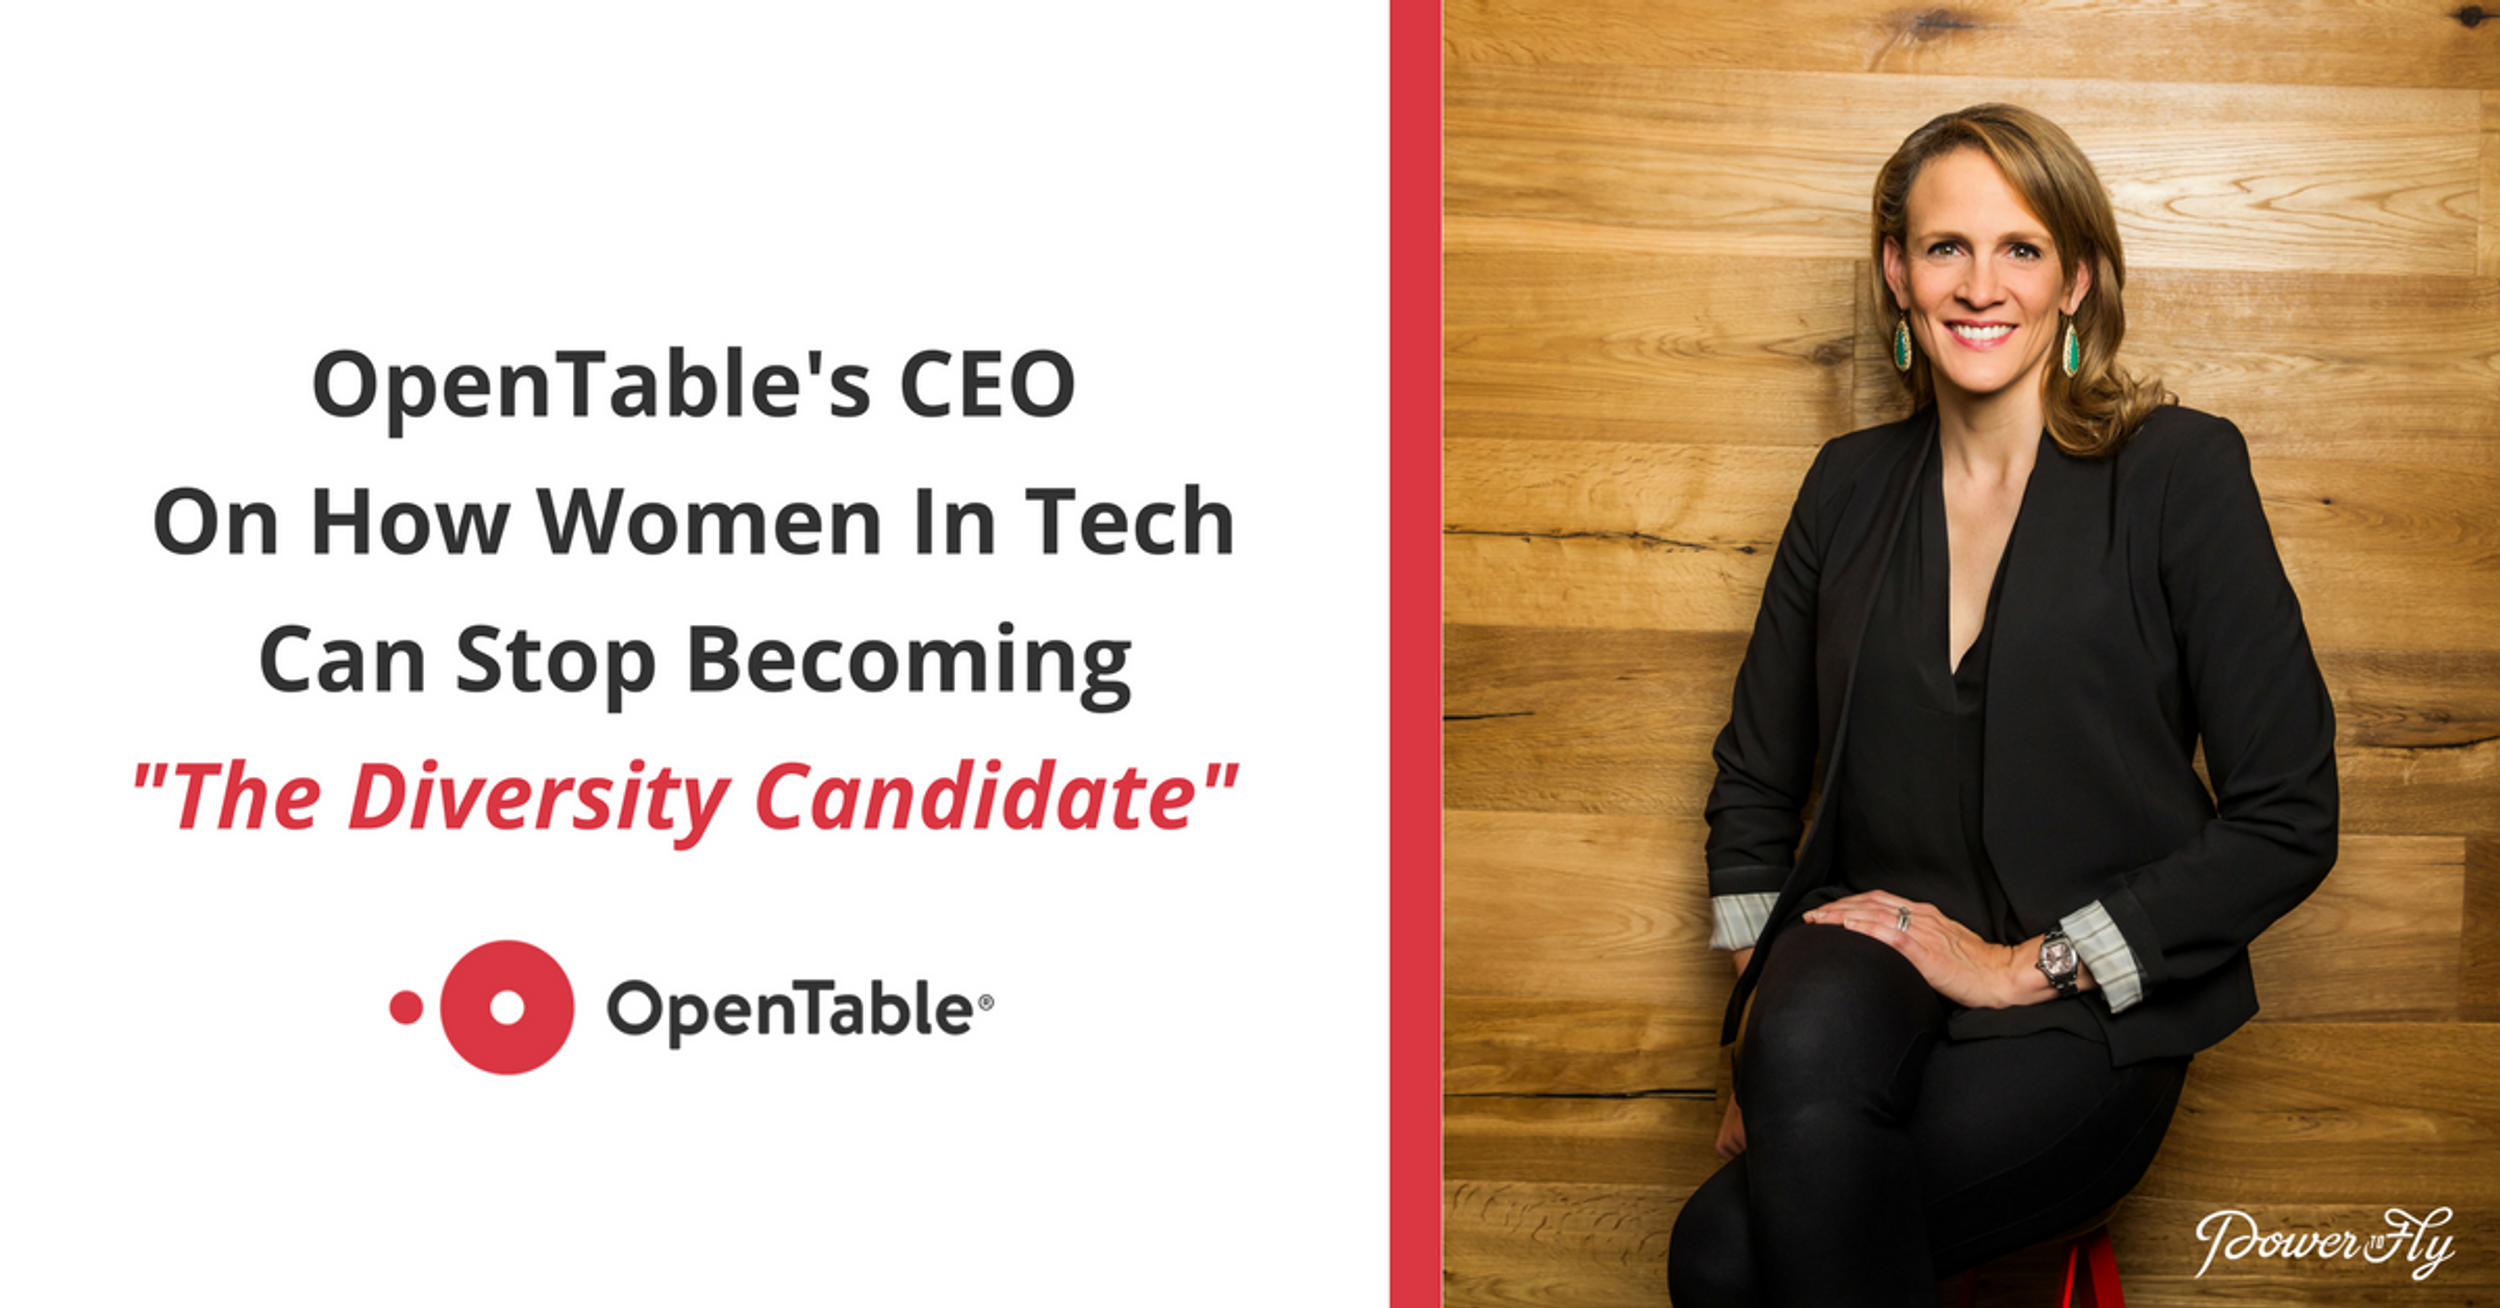 OpenTable’s CEO On How Women In Tech Can Stop Becoming “The Diversity Candidate”